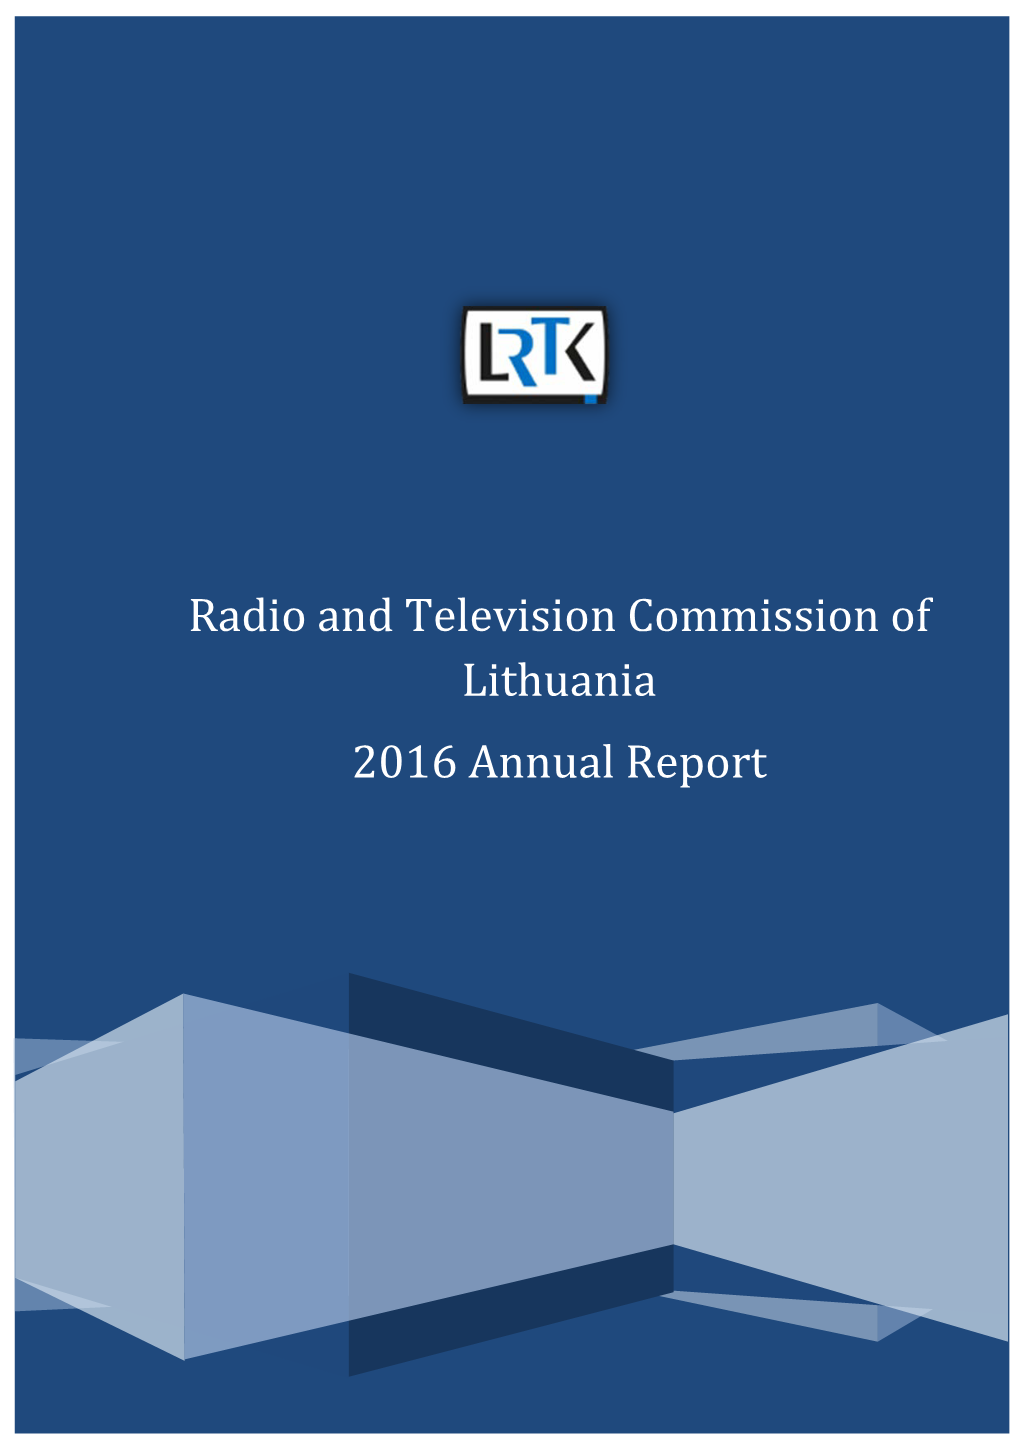 Radio and Television Commission of Lithuania 2016 Annual Report